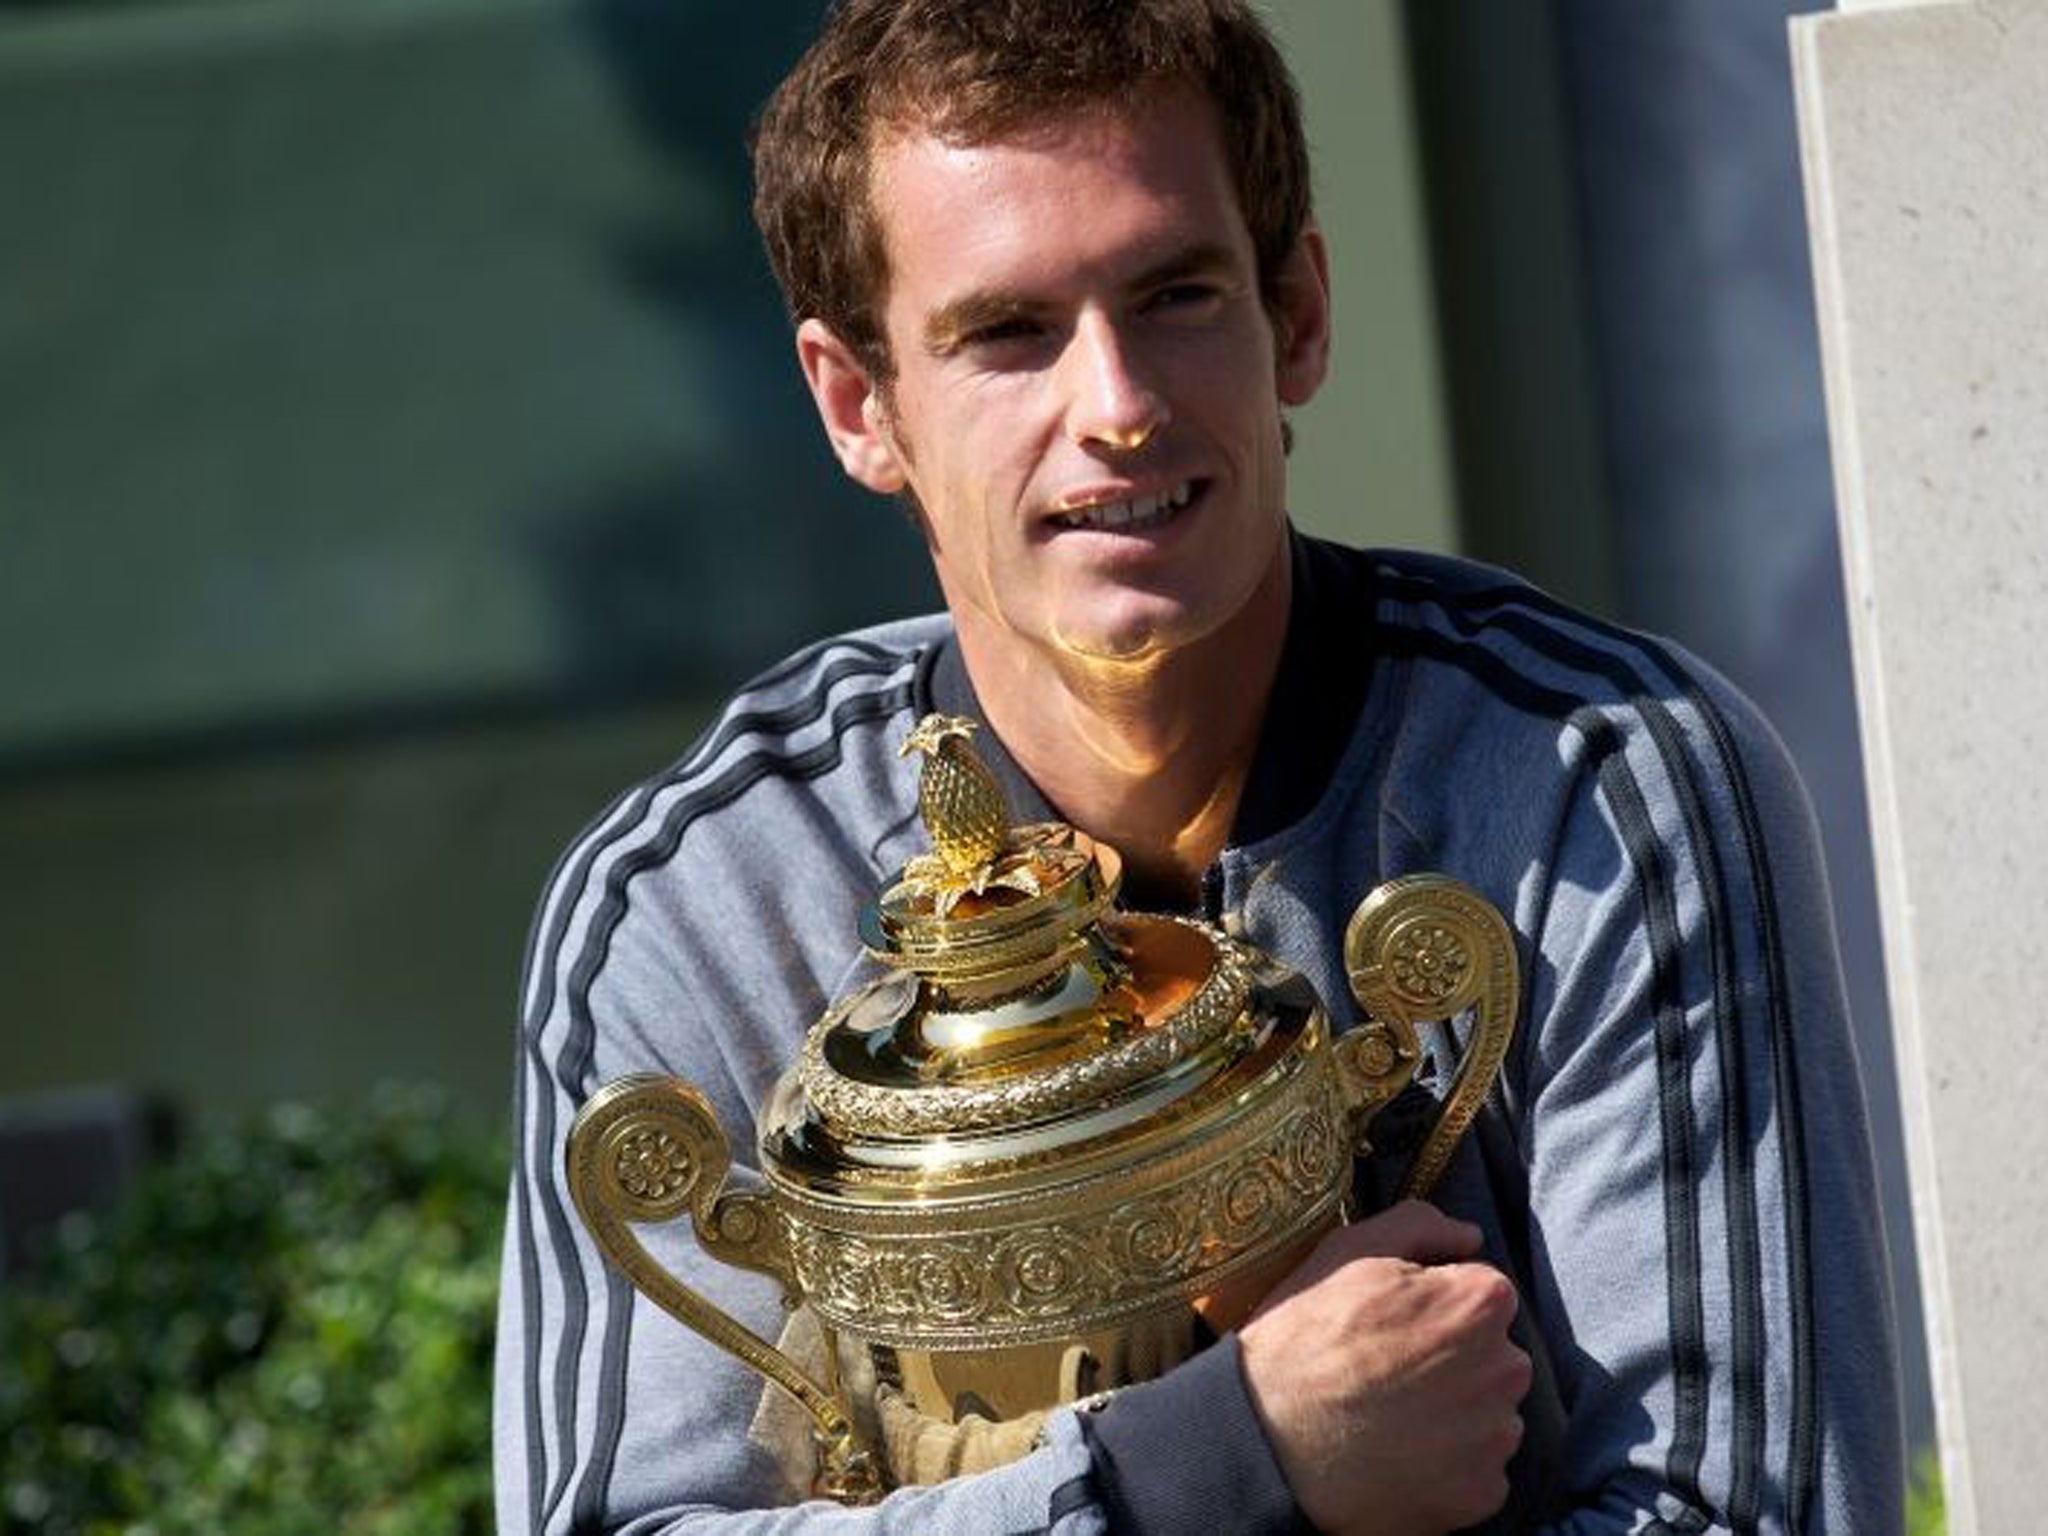 Andy Murray Following on from his Olympic gold and victory in the 2012 US Open, 2013 saw the Scot go on to win the tournament that really mattered to British sports fans. The 77-year wait for a British champion of Wimbledon was brought to an e